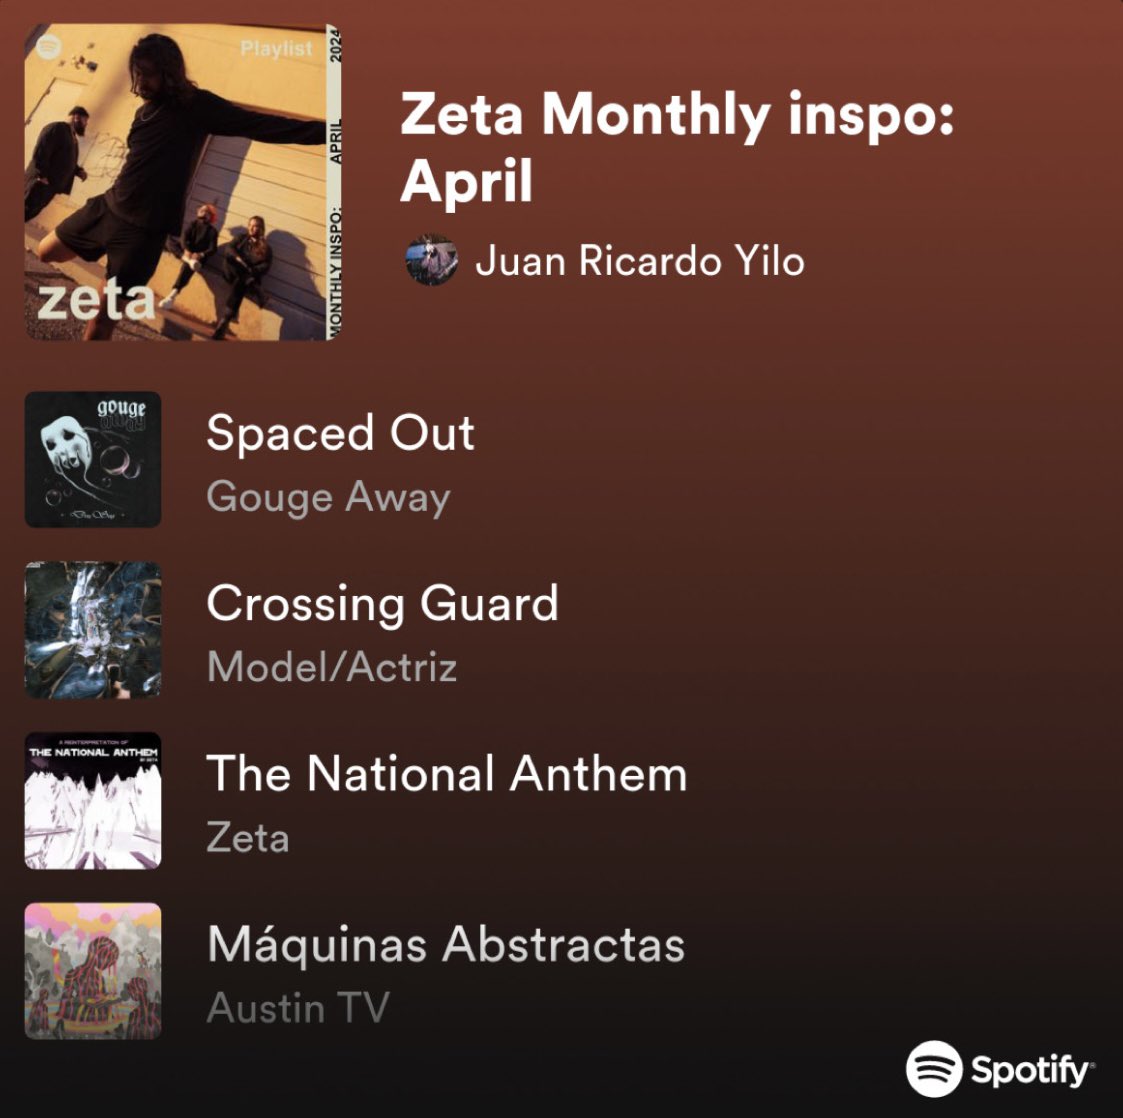 New Playlist 🚨 Zeta Monthly Inspo: April🔥 songs we have been listening in repeat lately. New and old releases that inspired us to release new music tr.ee/Zetaplaylist Note: archive playlist also available in case you wanted to revisit march’s tr.ee/Playlistarchive